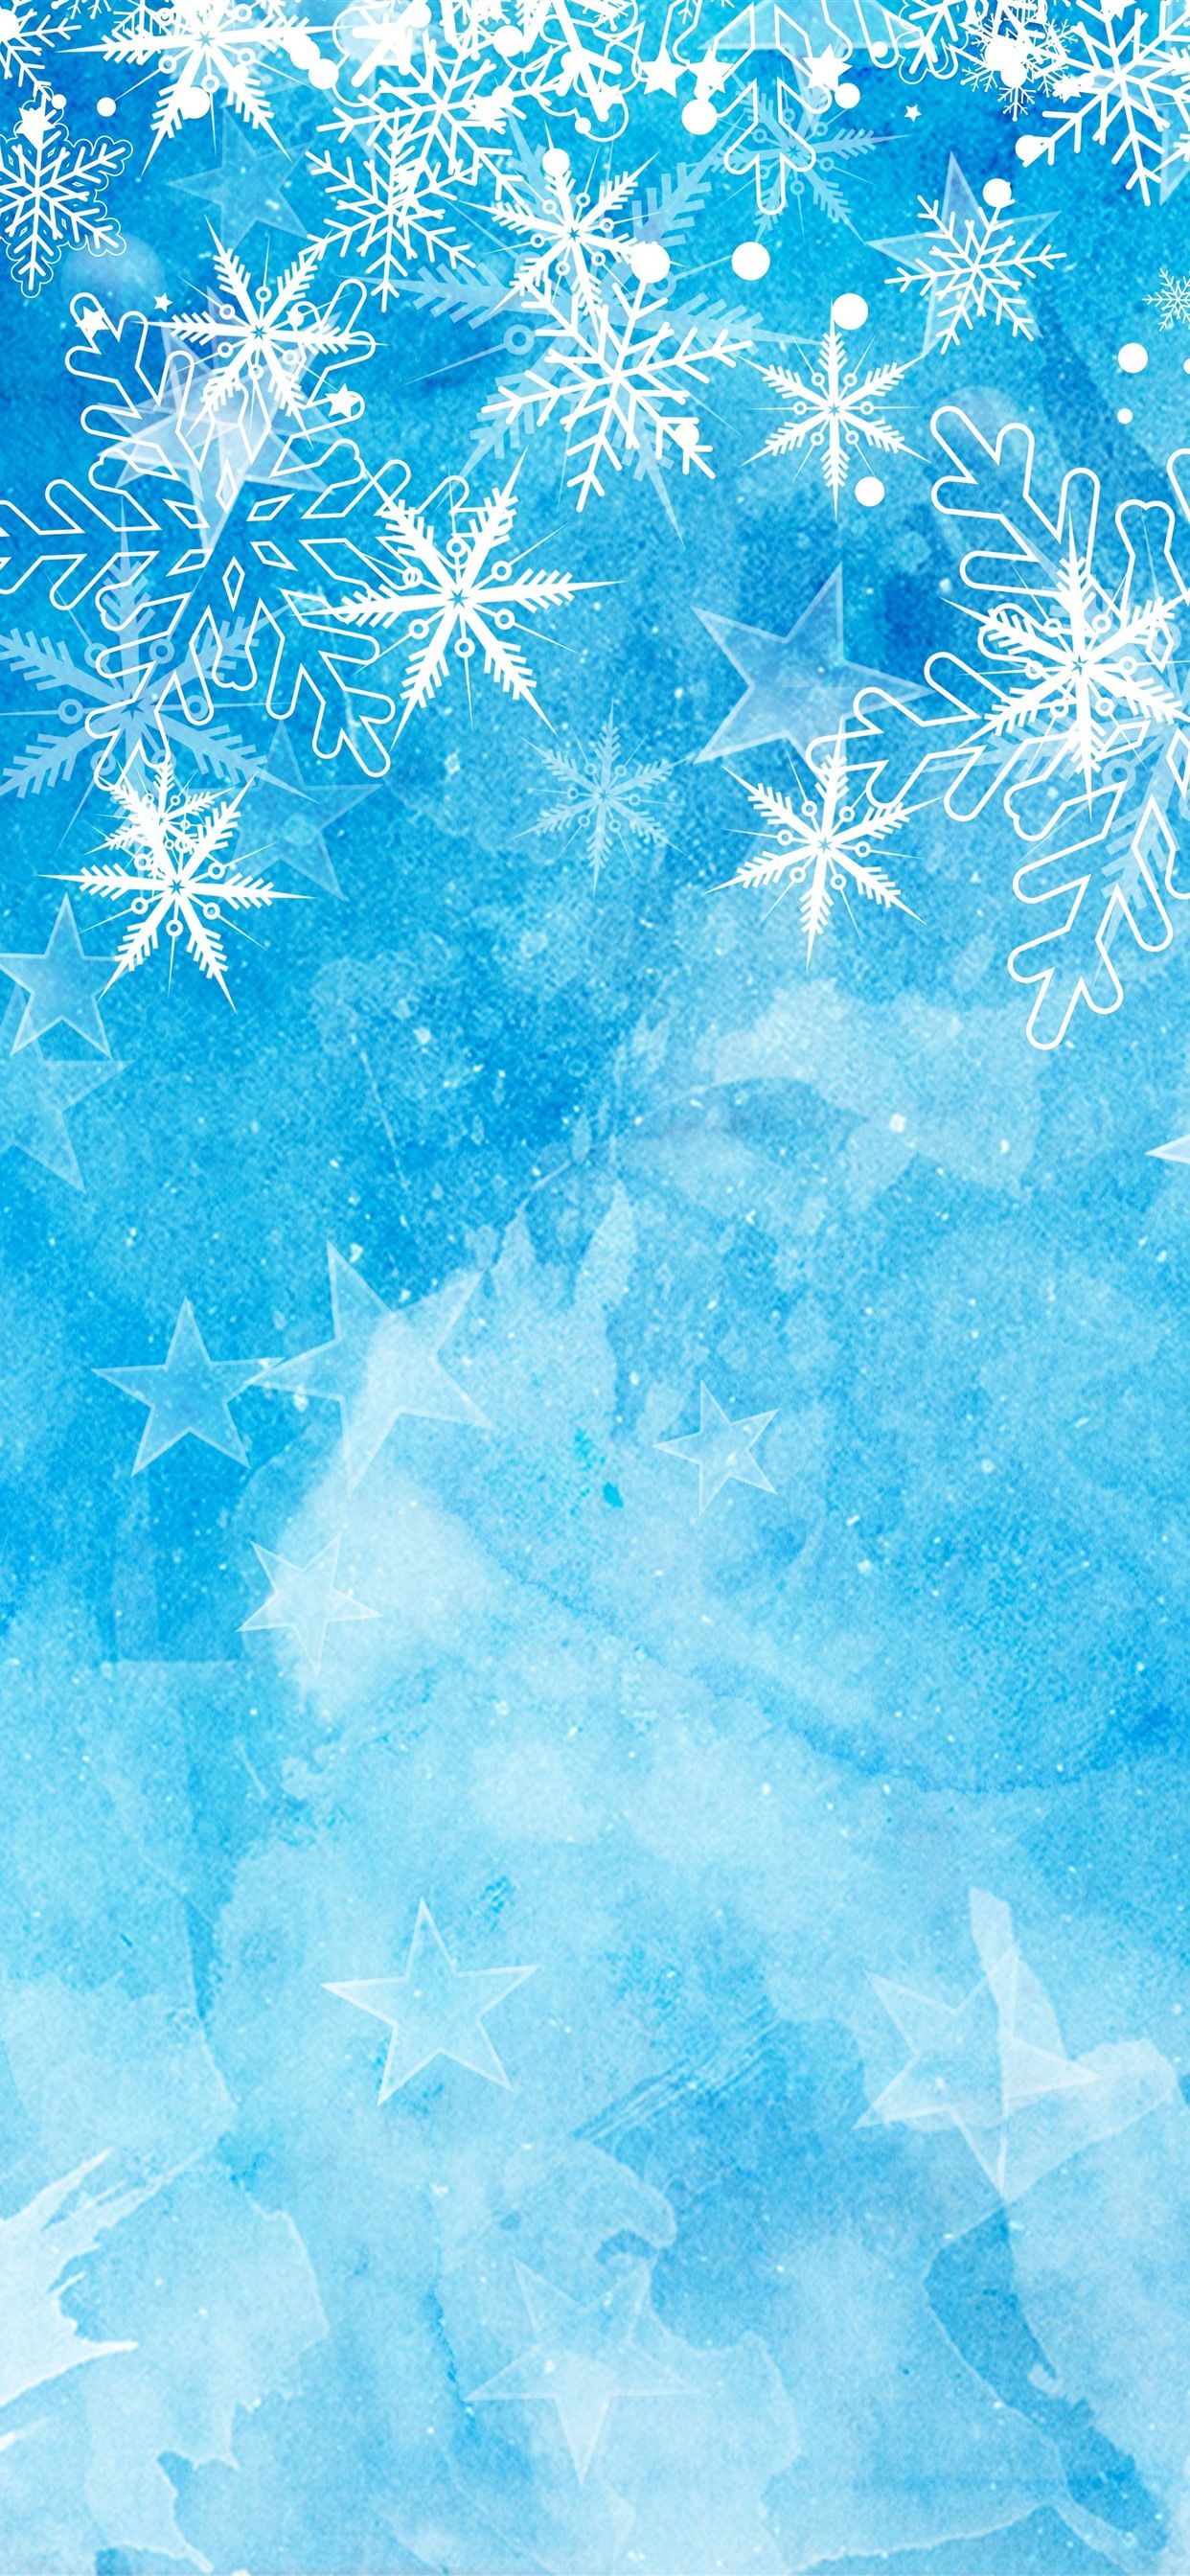 Snowflakes, Blue Background, Christmas Theme 1242x2688 IPhone 11 Pro XS Max Wallpaper, Background, Picture, Image